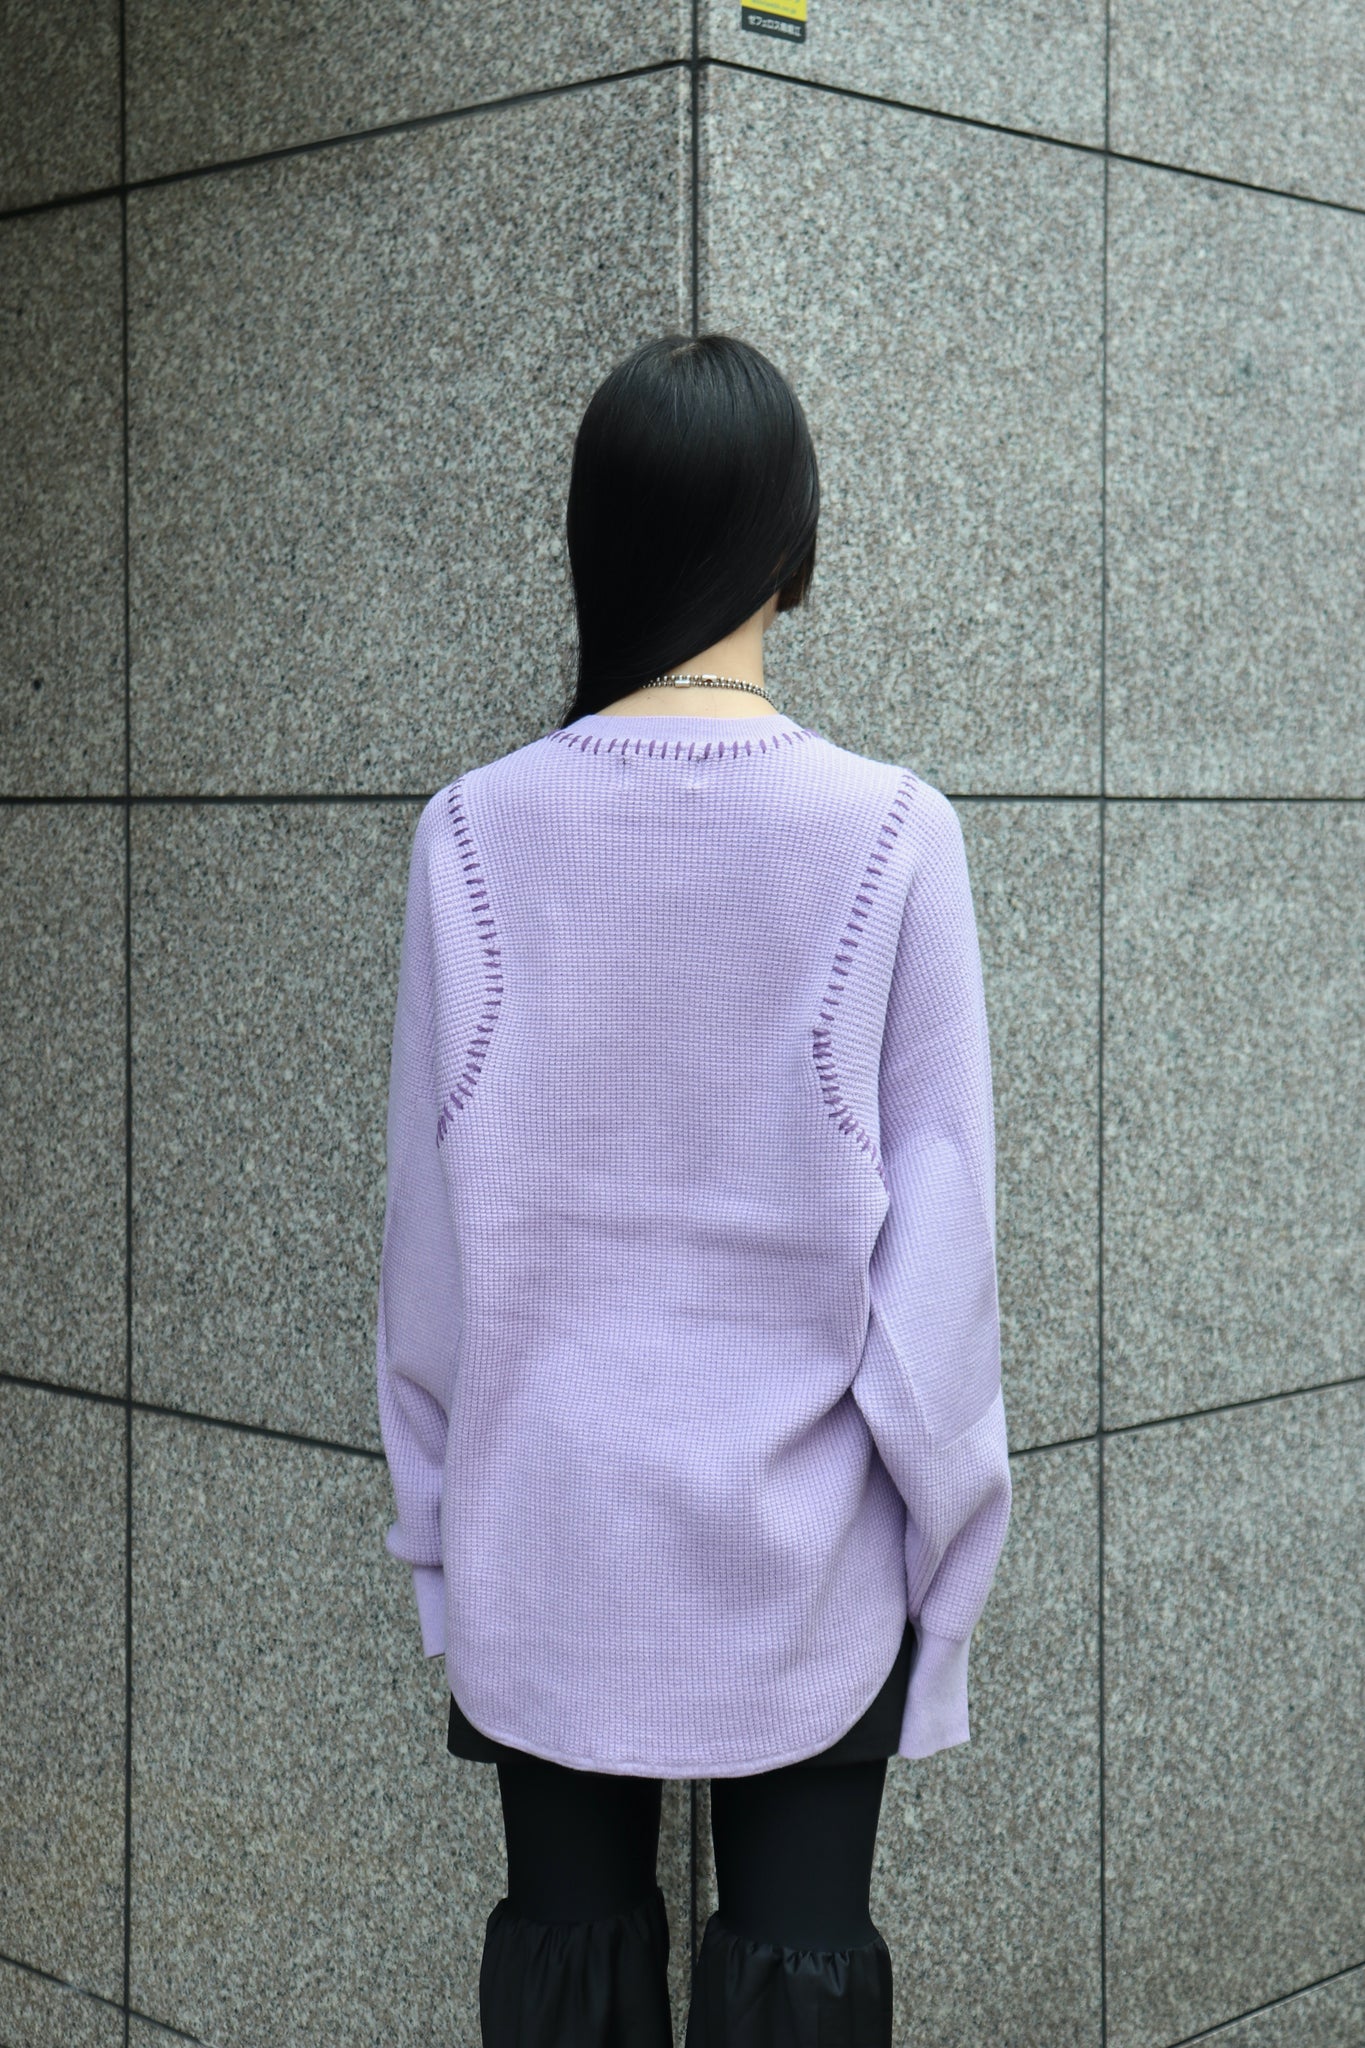 Styling image using SODUK 23aw Thermal Knit Pullover (Purple)